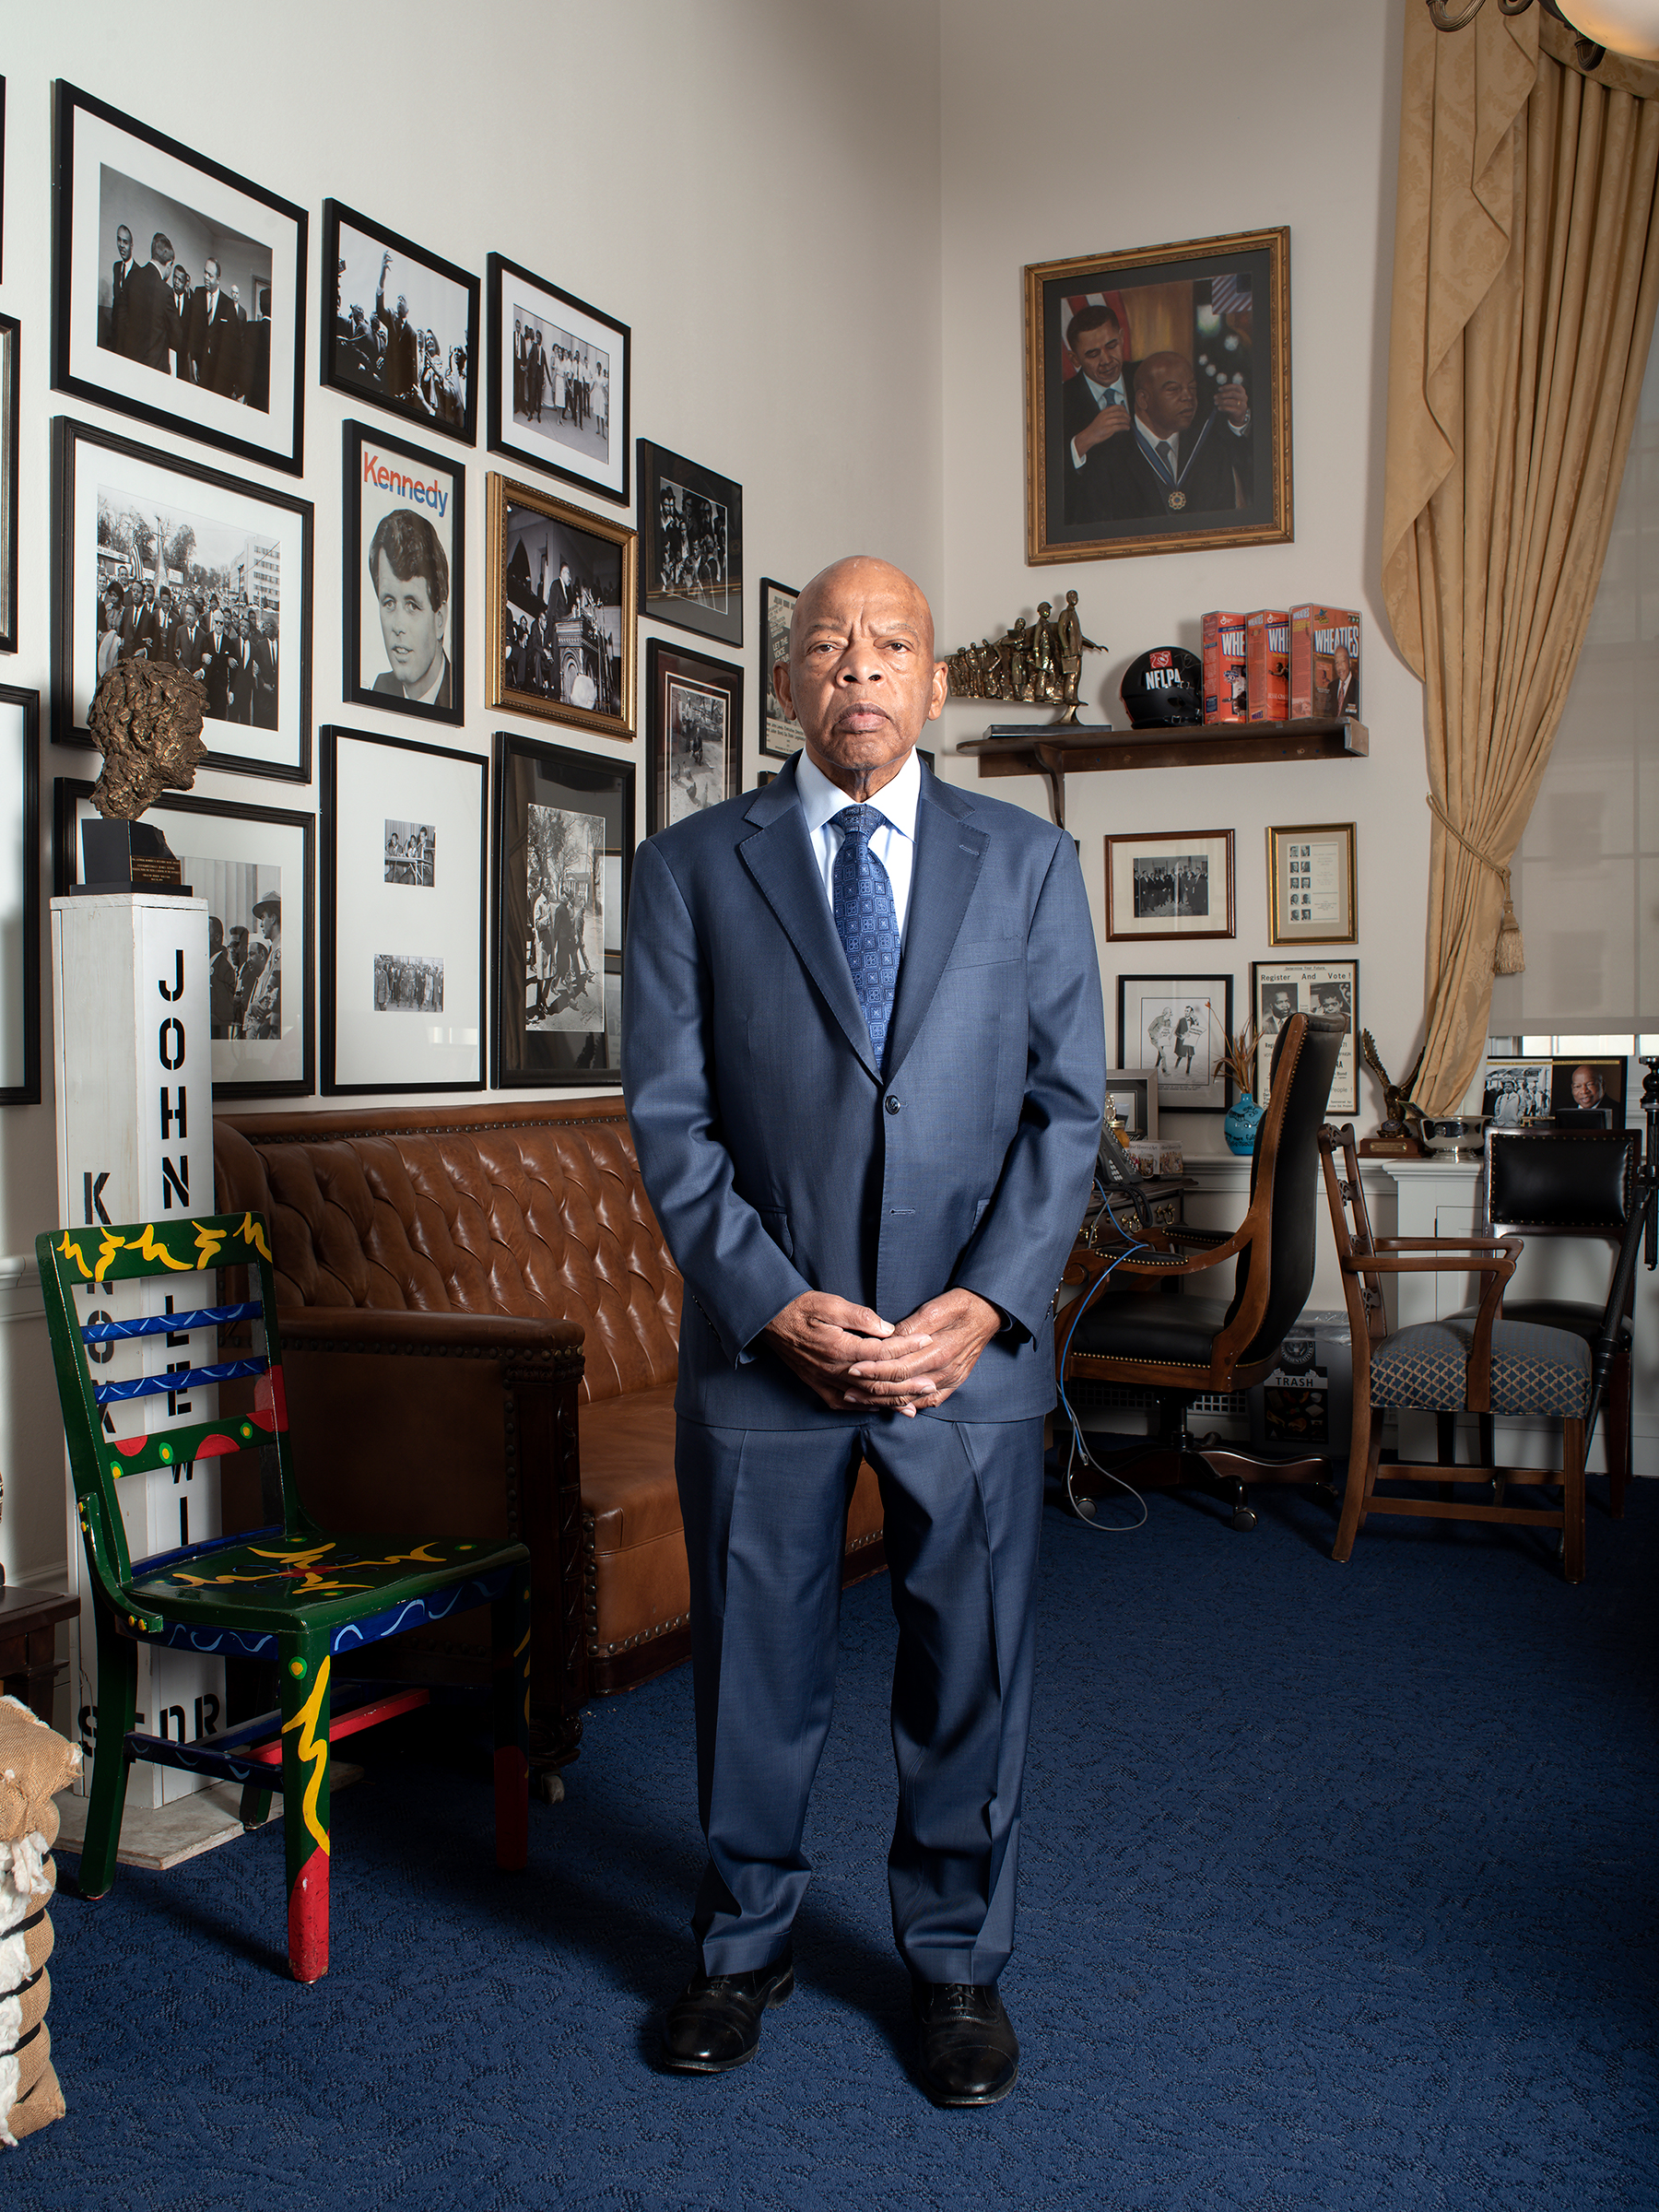 Among the greatest to farm the lands of liberation, John Lewis sits high in the American canon of heroes because his blood and tears watered the ground on which we now stand.